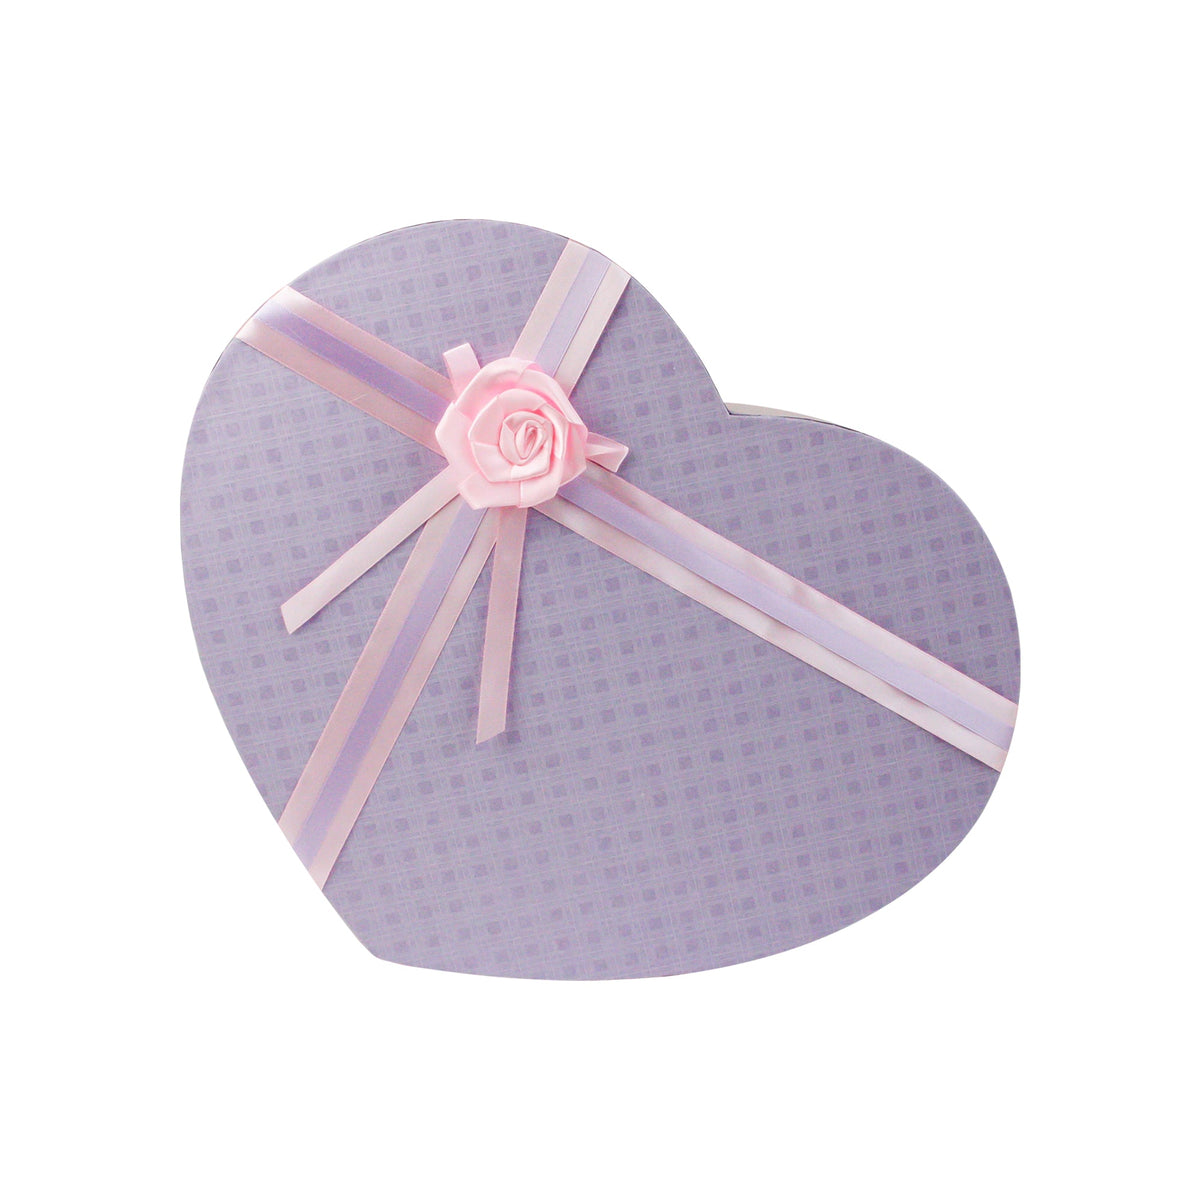 Single Pink/Lilac Gift Box with Satin Ribbon (Sizes Available)